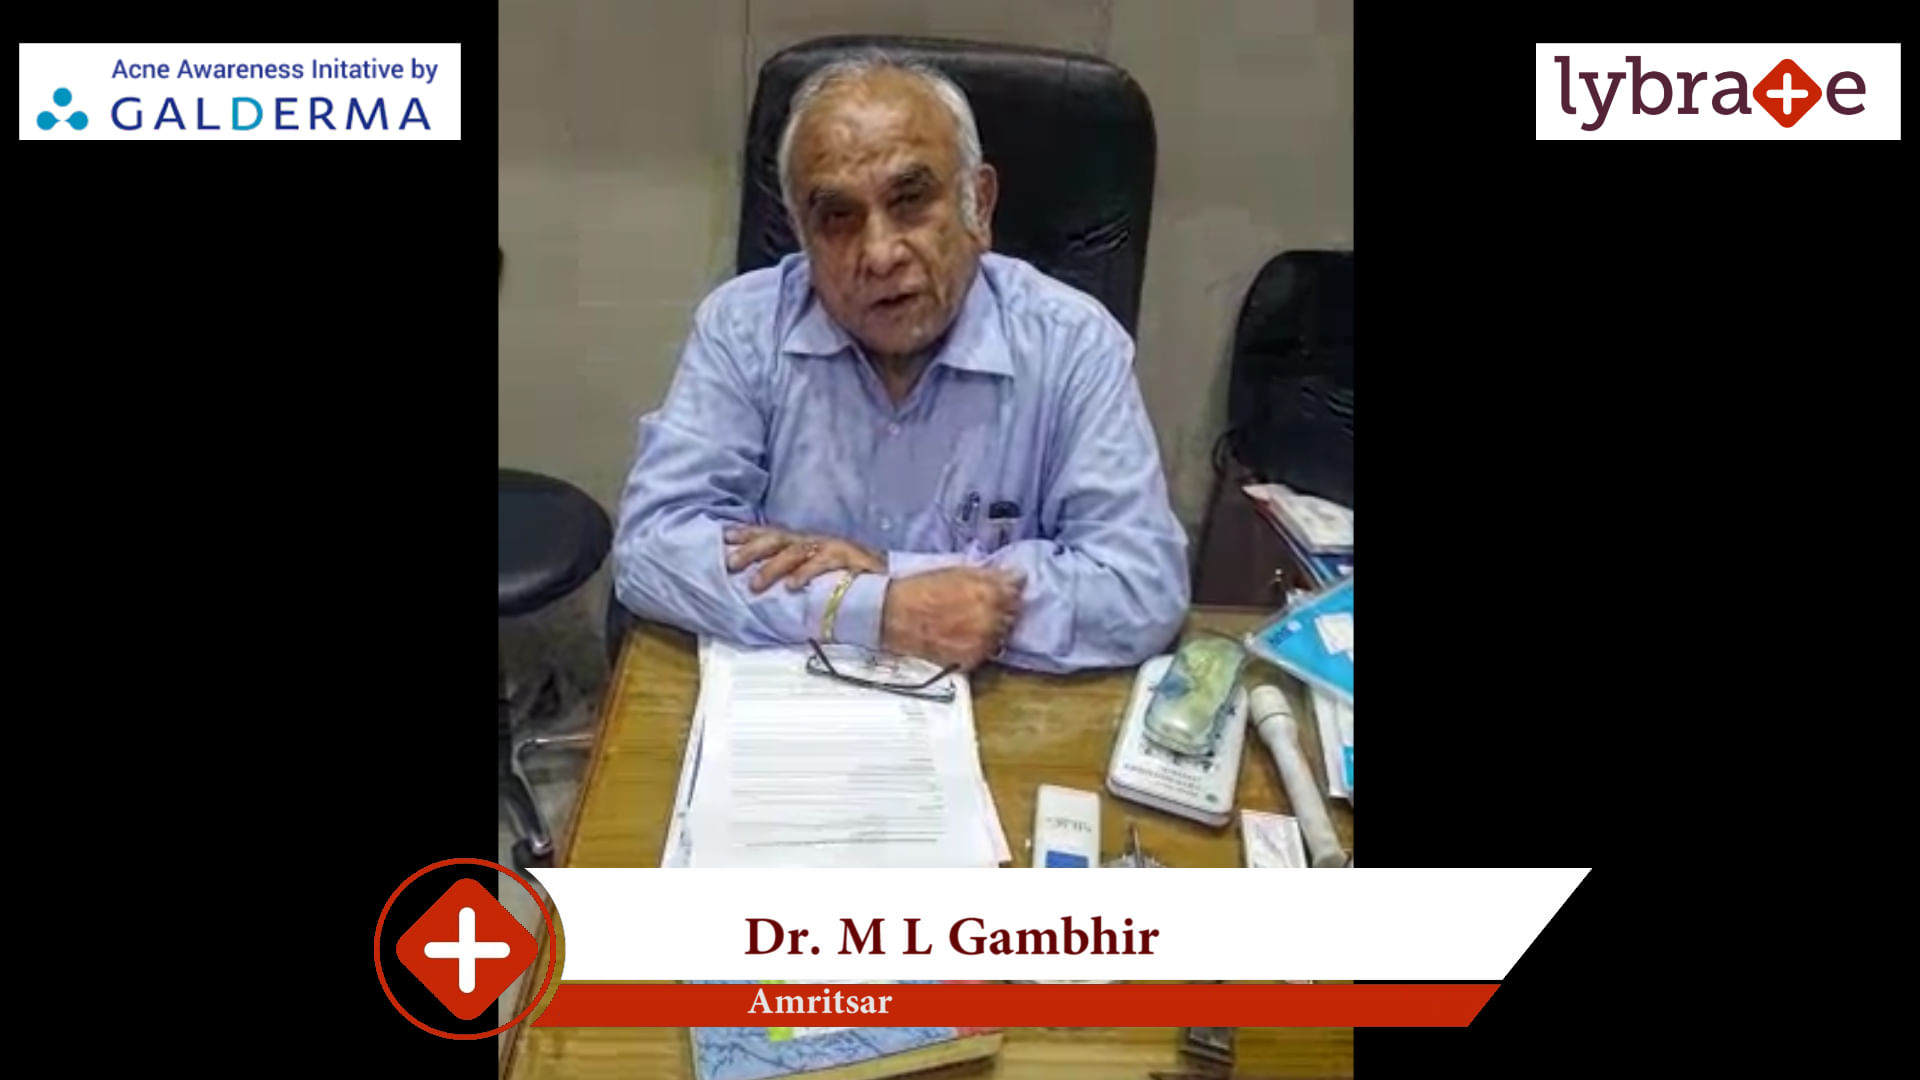 Lybrate | Dr. M L Gambhir speaks on IMPORTANCE OF TREATING ACNE EARLY